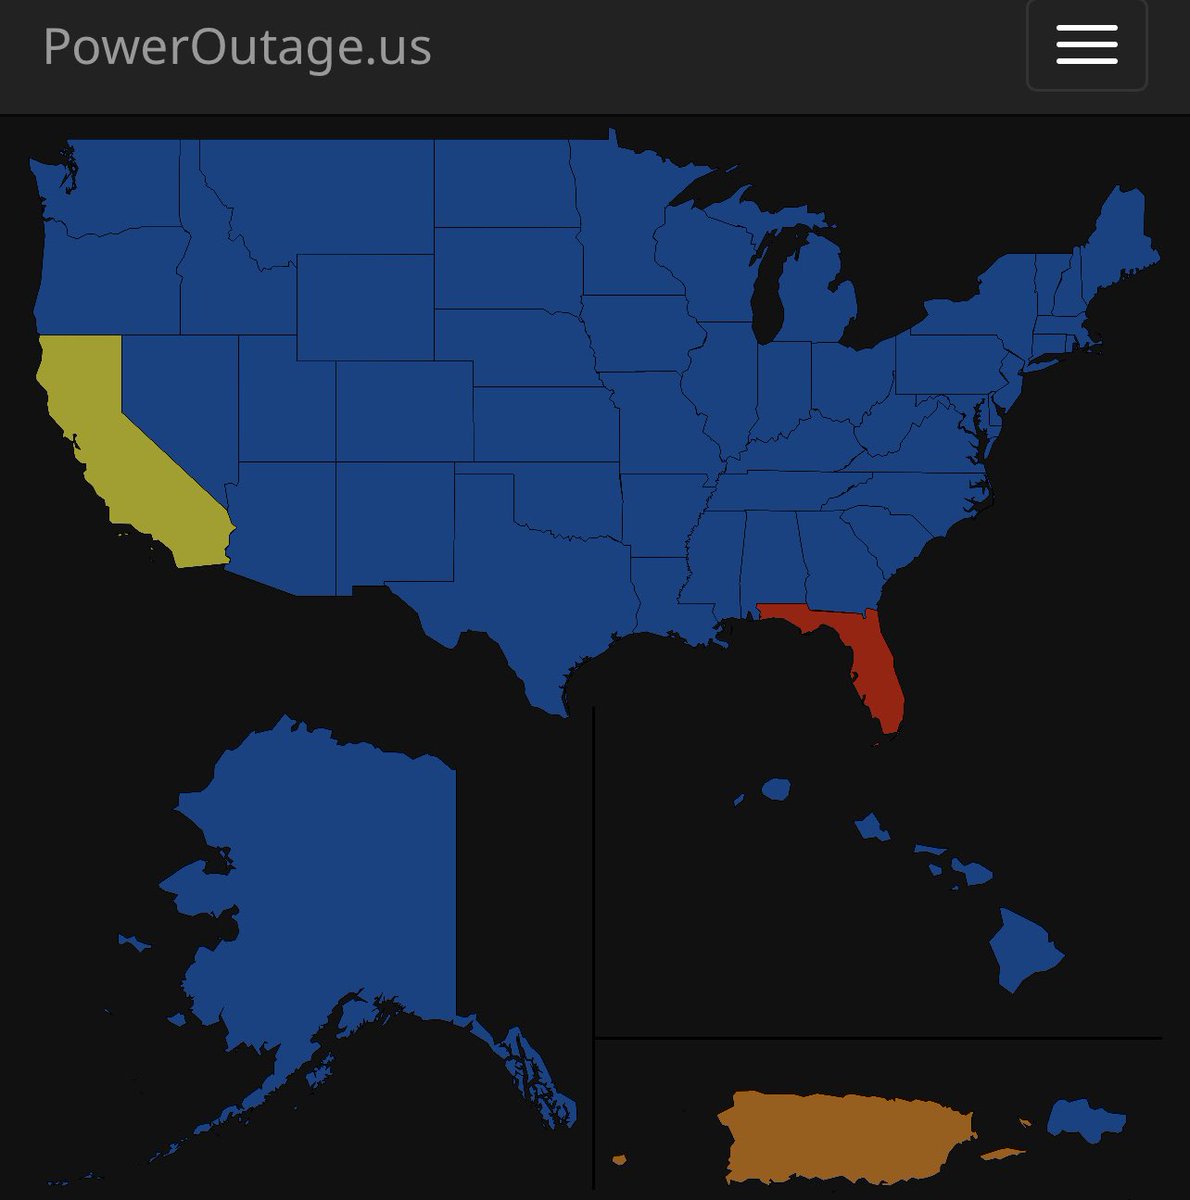 Florida: About 2.5 million people who lost power have had it restored, about 200k are waiting for power restoration which is expected in the next couple of days. Florida was hit by a Category 4/5 hurricane last week. What is California’s excuse? 🤔